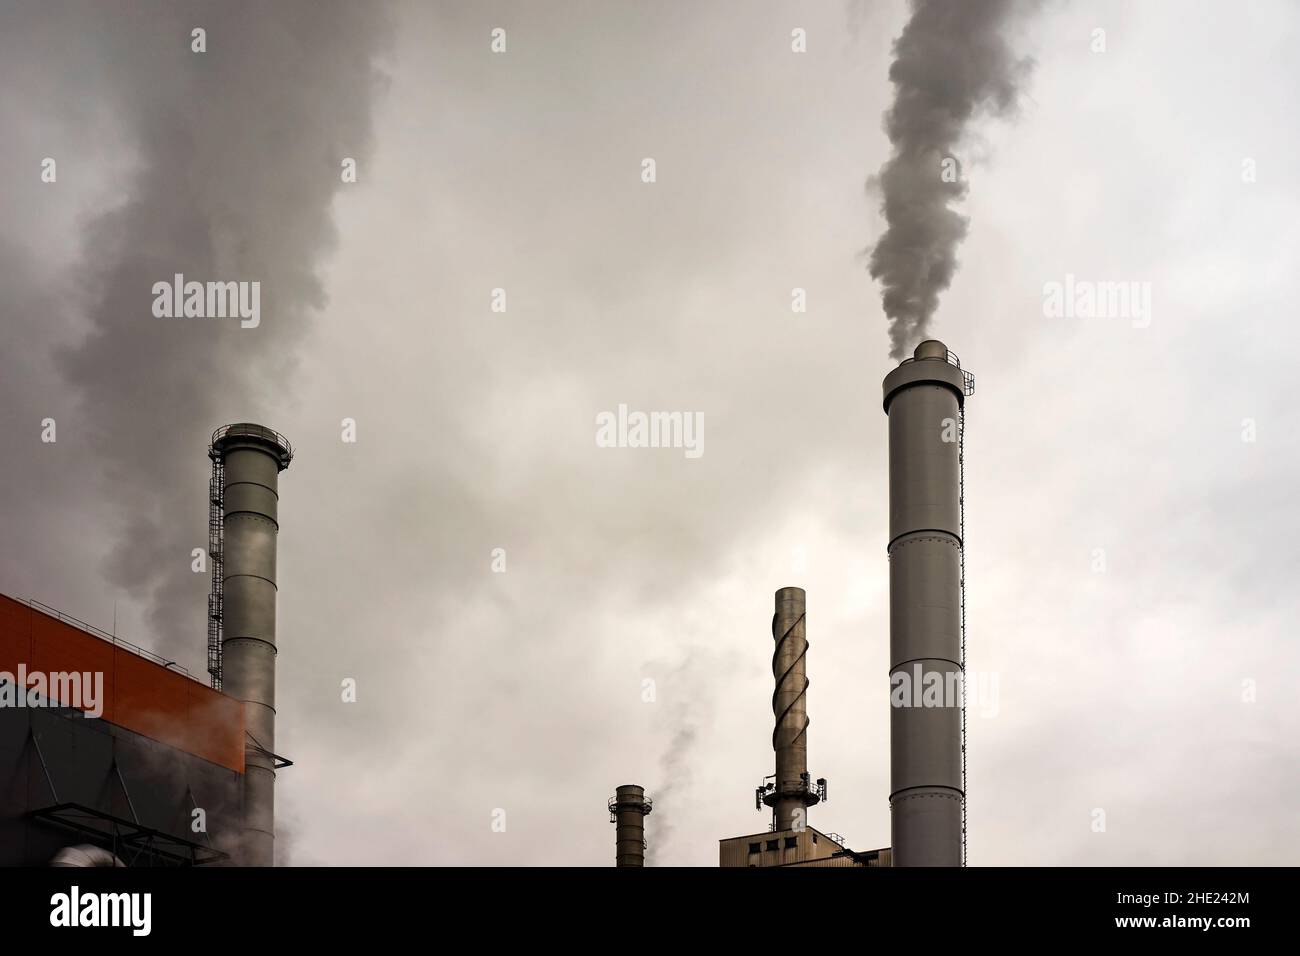 Industrial chimneys producing carbon imprint emissions Stock Photo